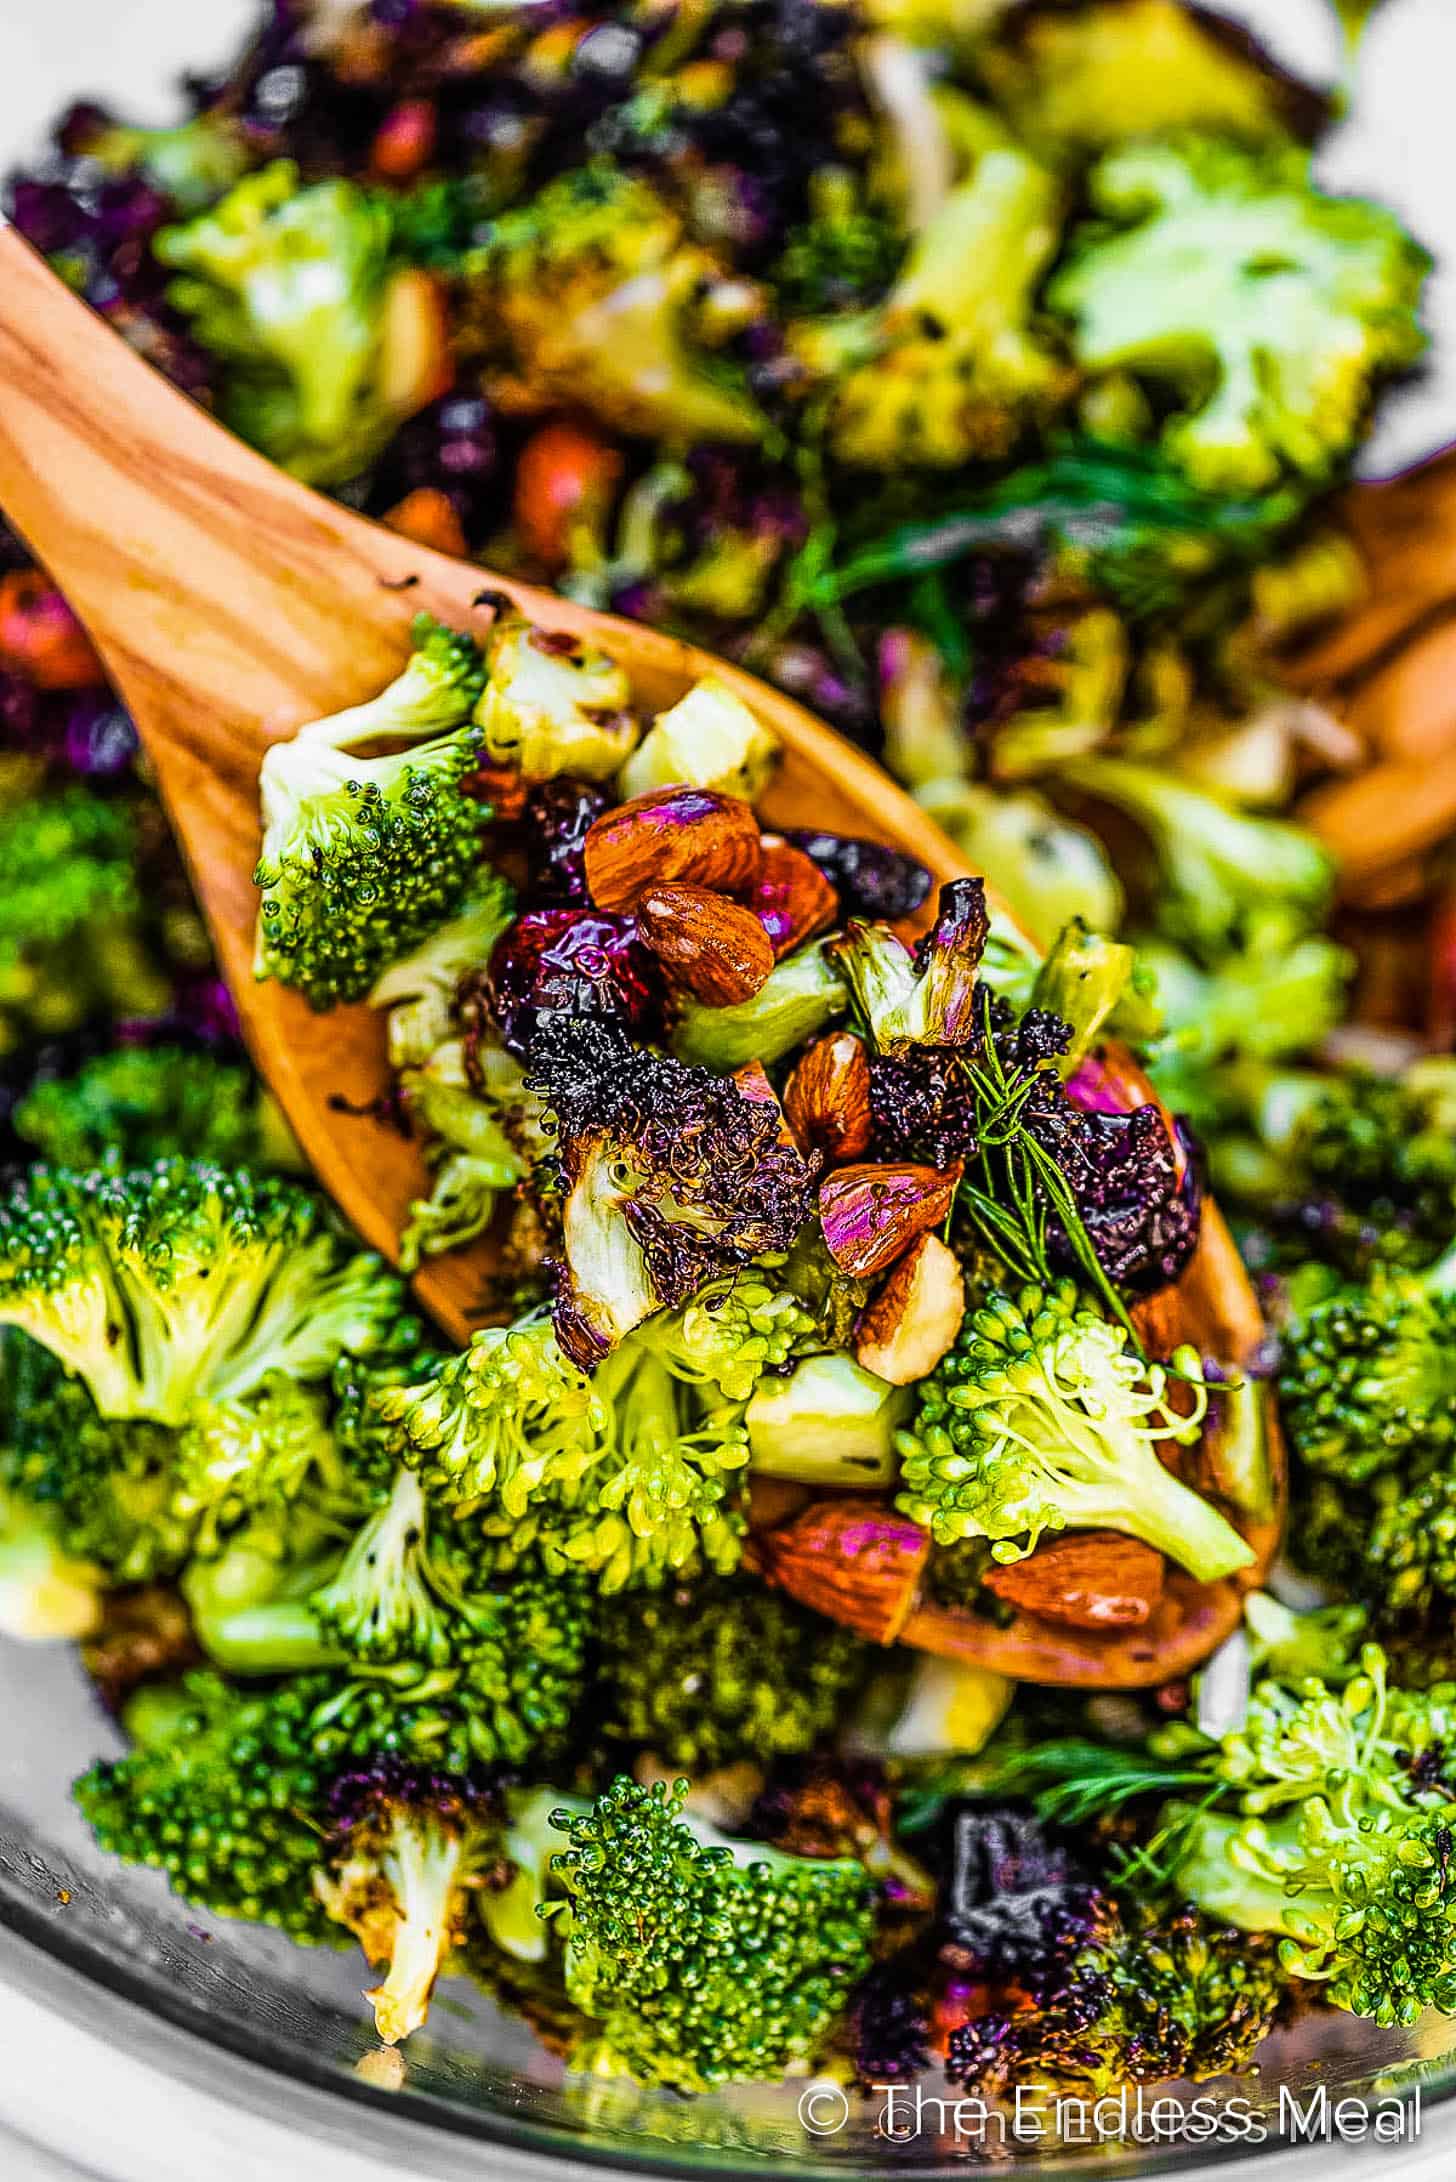 A scoop of roasted broccoli salad on a wooden spoon.